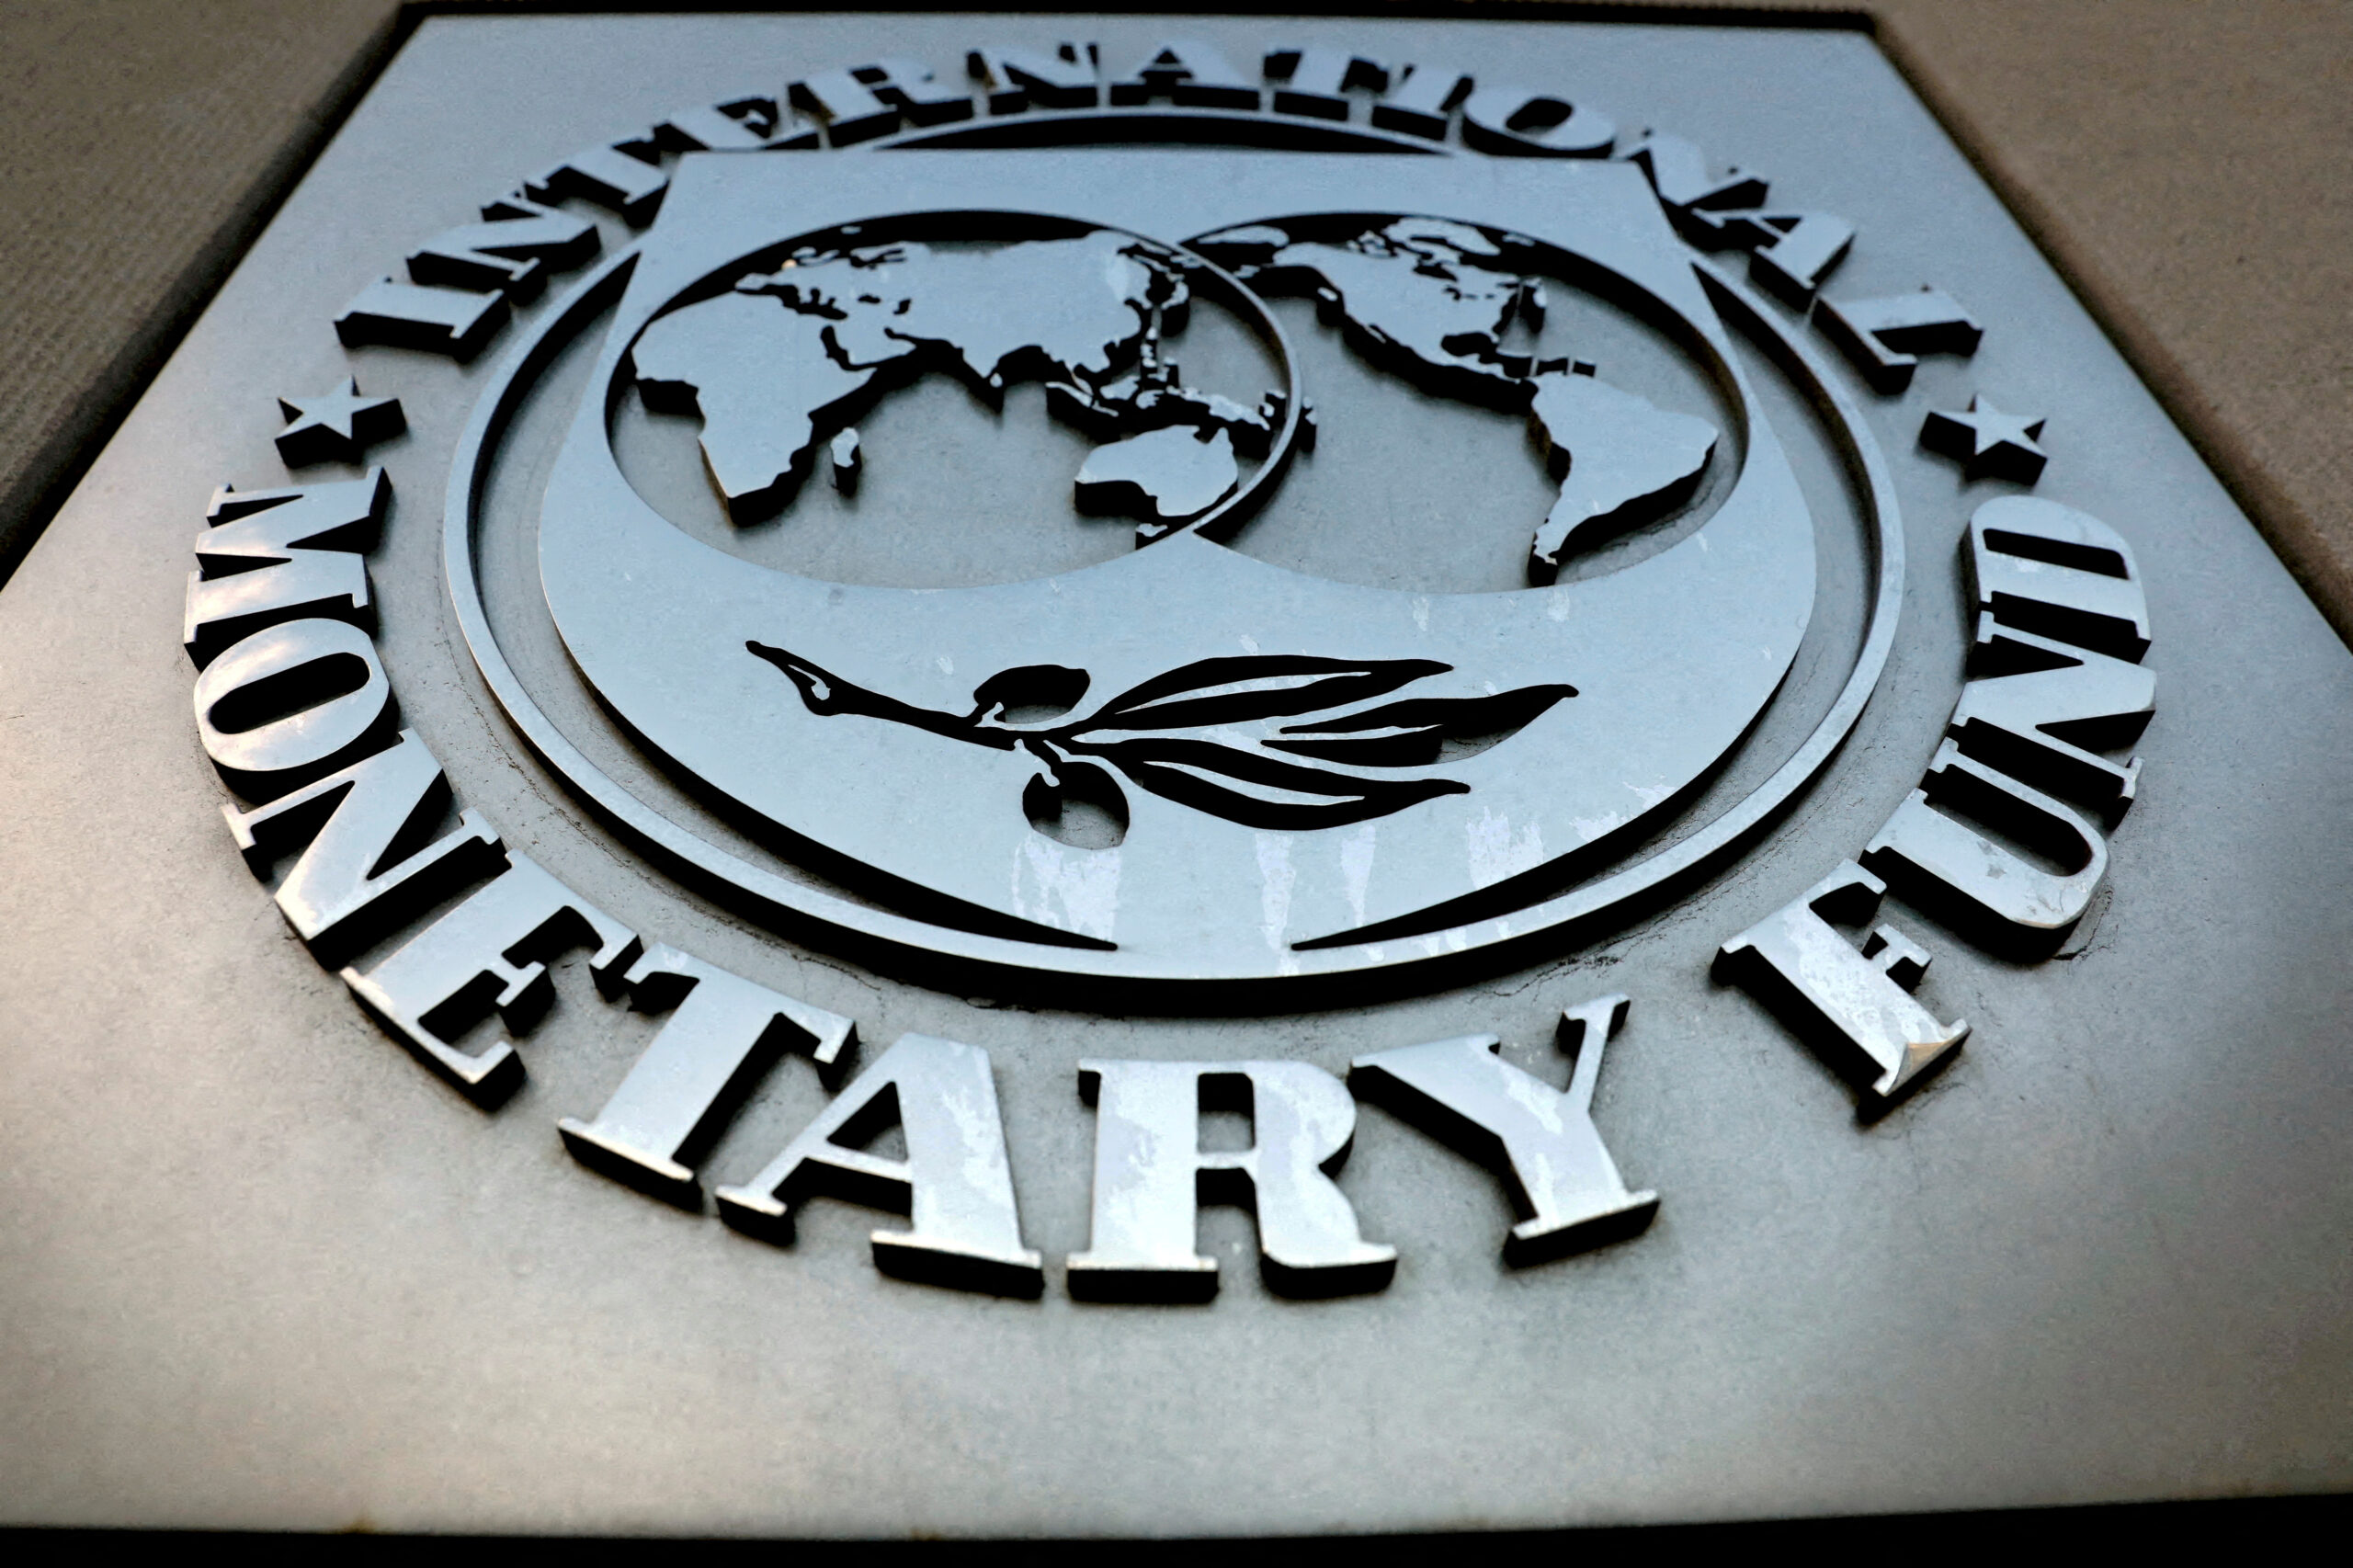 IMF to disburse US$800 million after Argentina’s eighth review approved